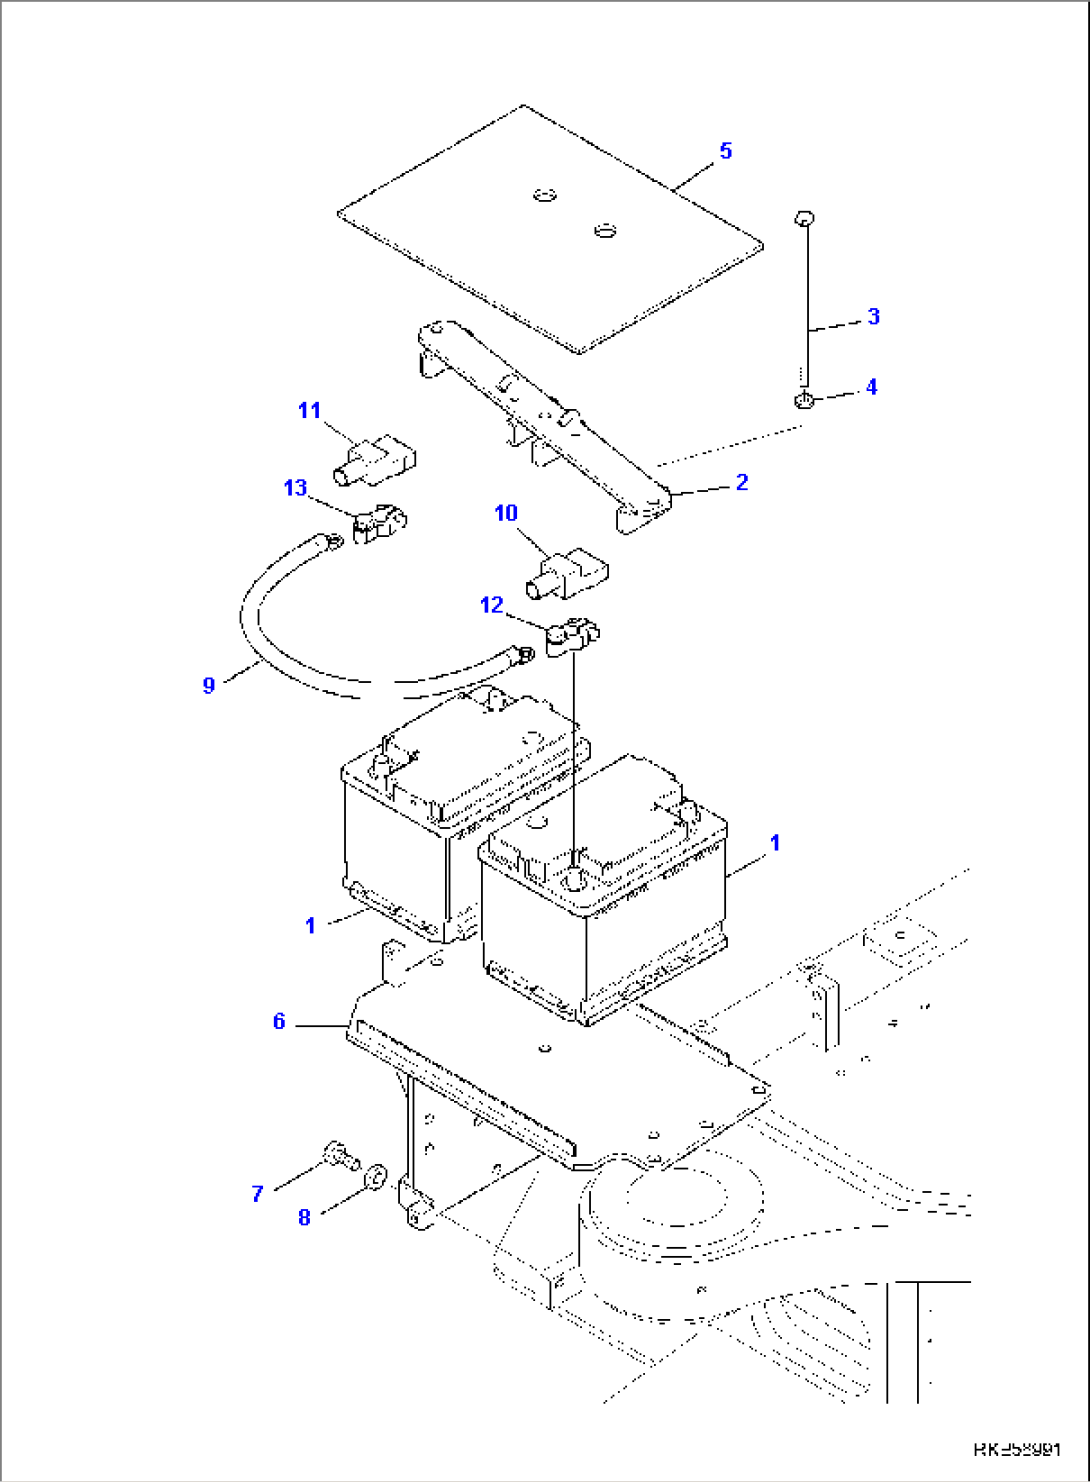 ELECTRICAL SYSTEM (BATTERY LINE) (2/3)